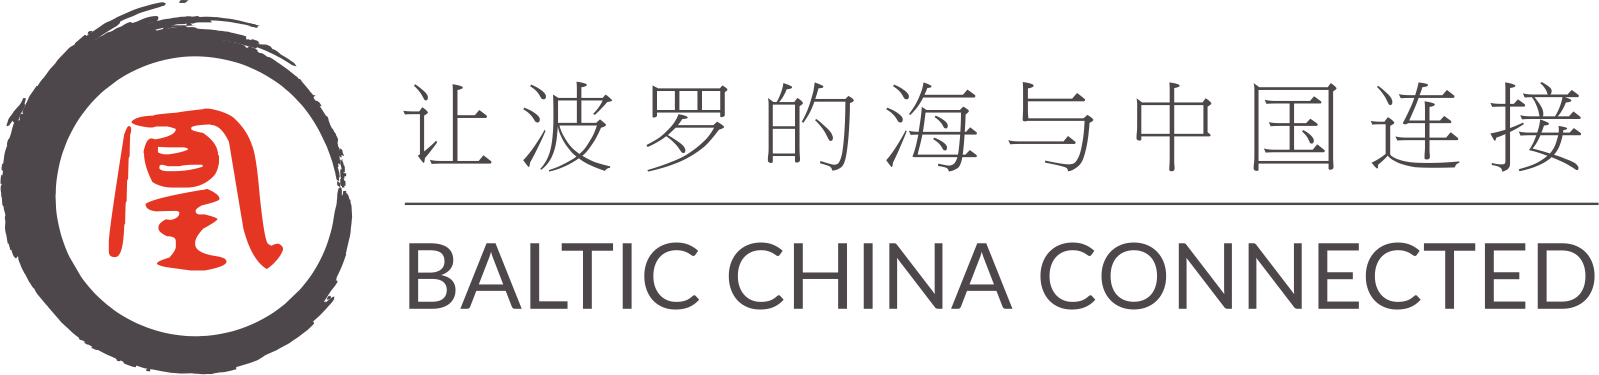 Baltic China Connected